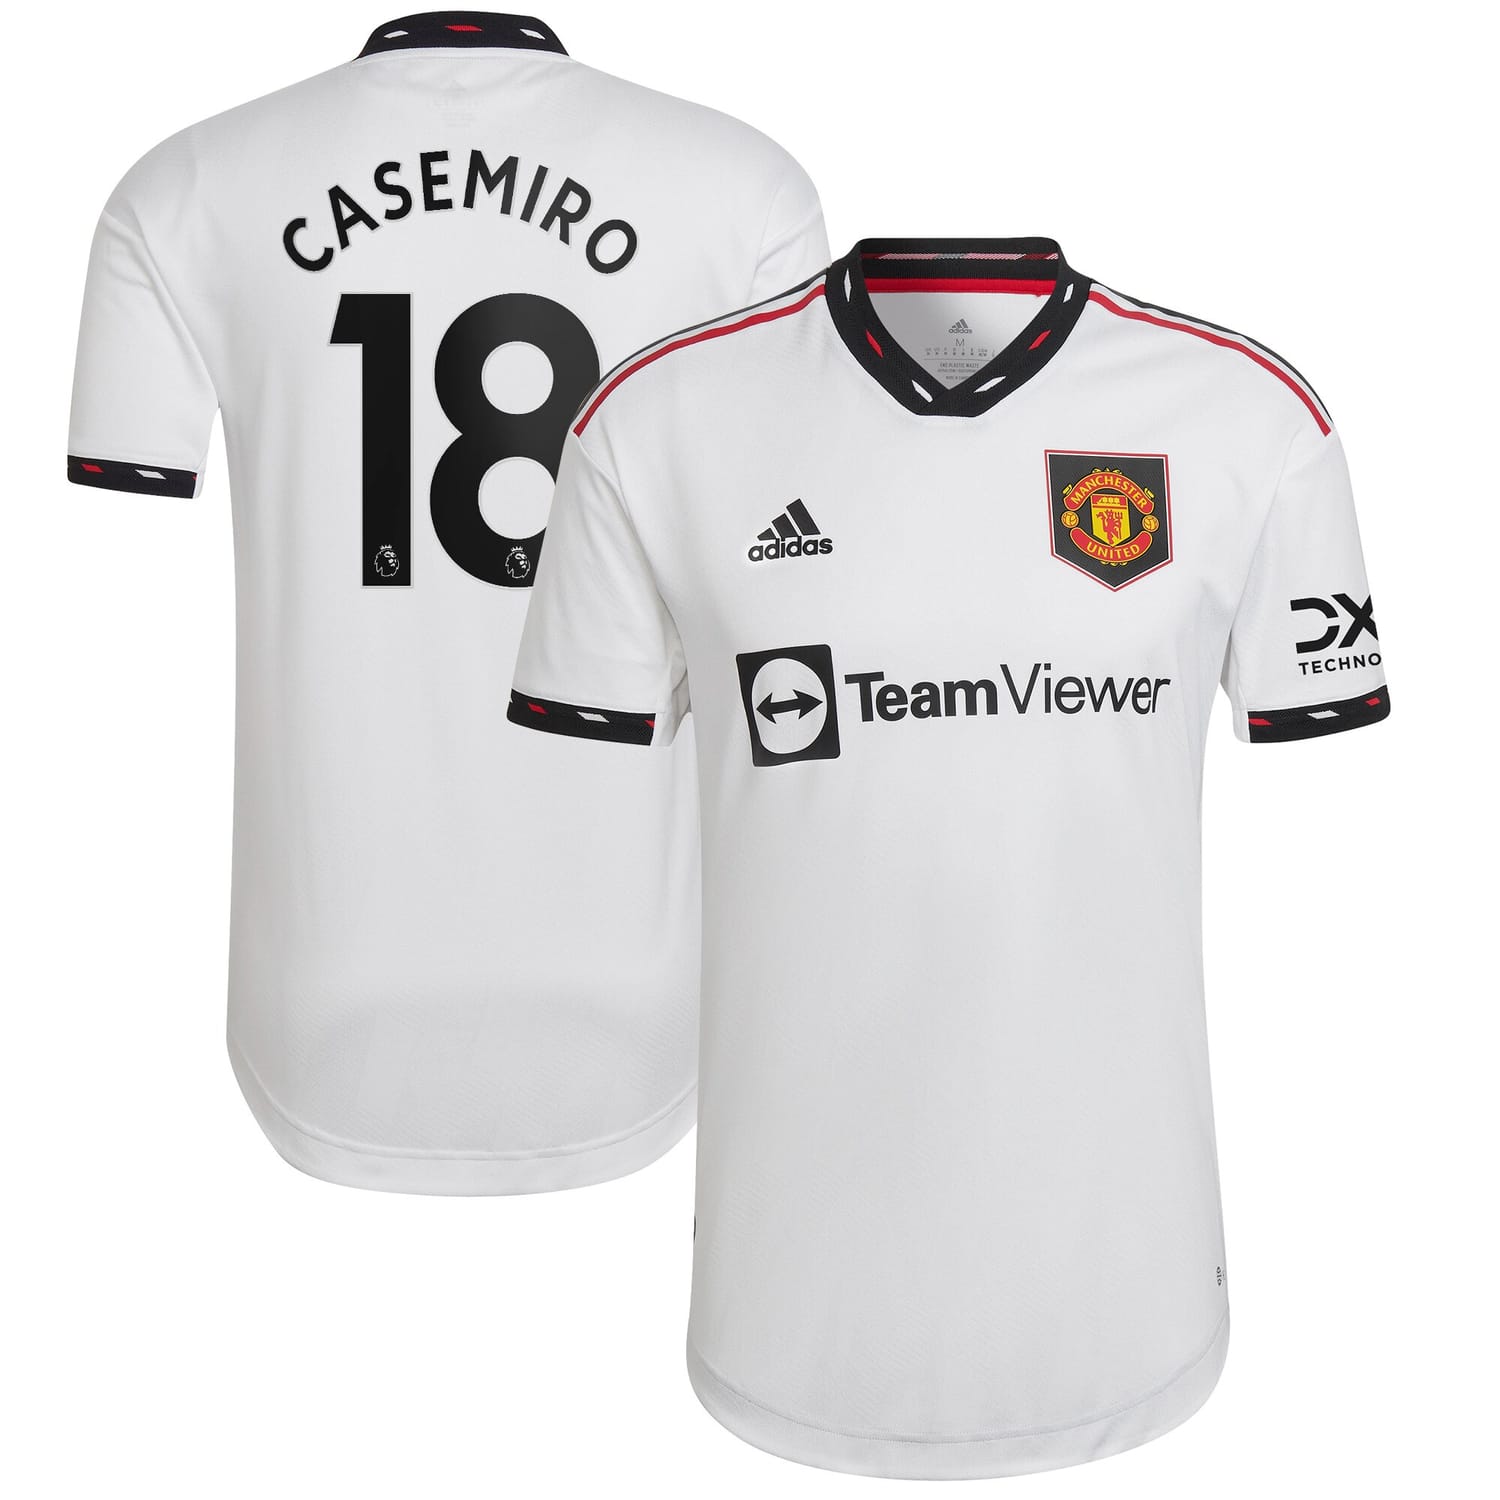 Premier League Manchester United Away Authentic Jersey Shirt 2022-23 player Casemiro 18 printing for Men